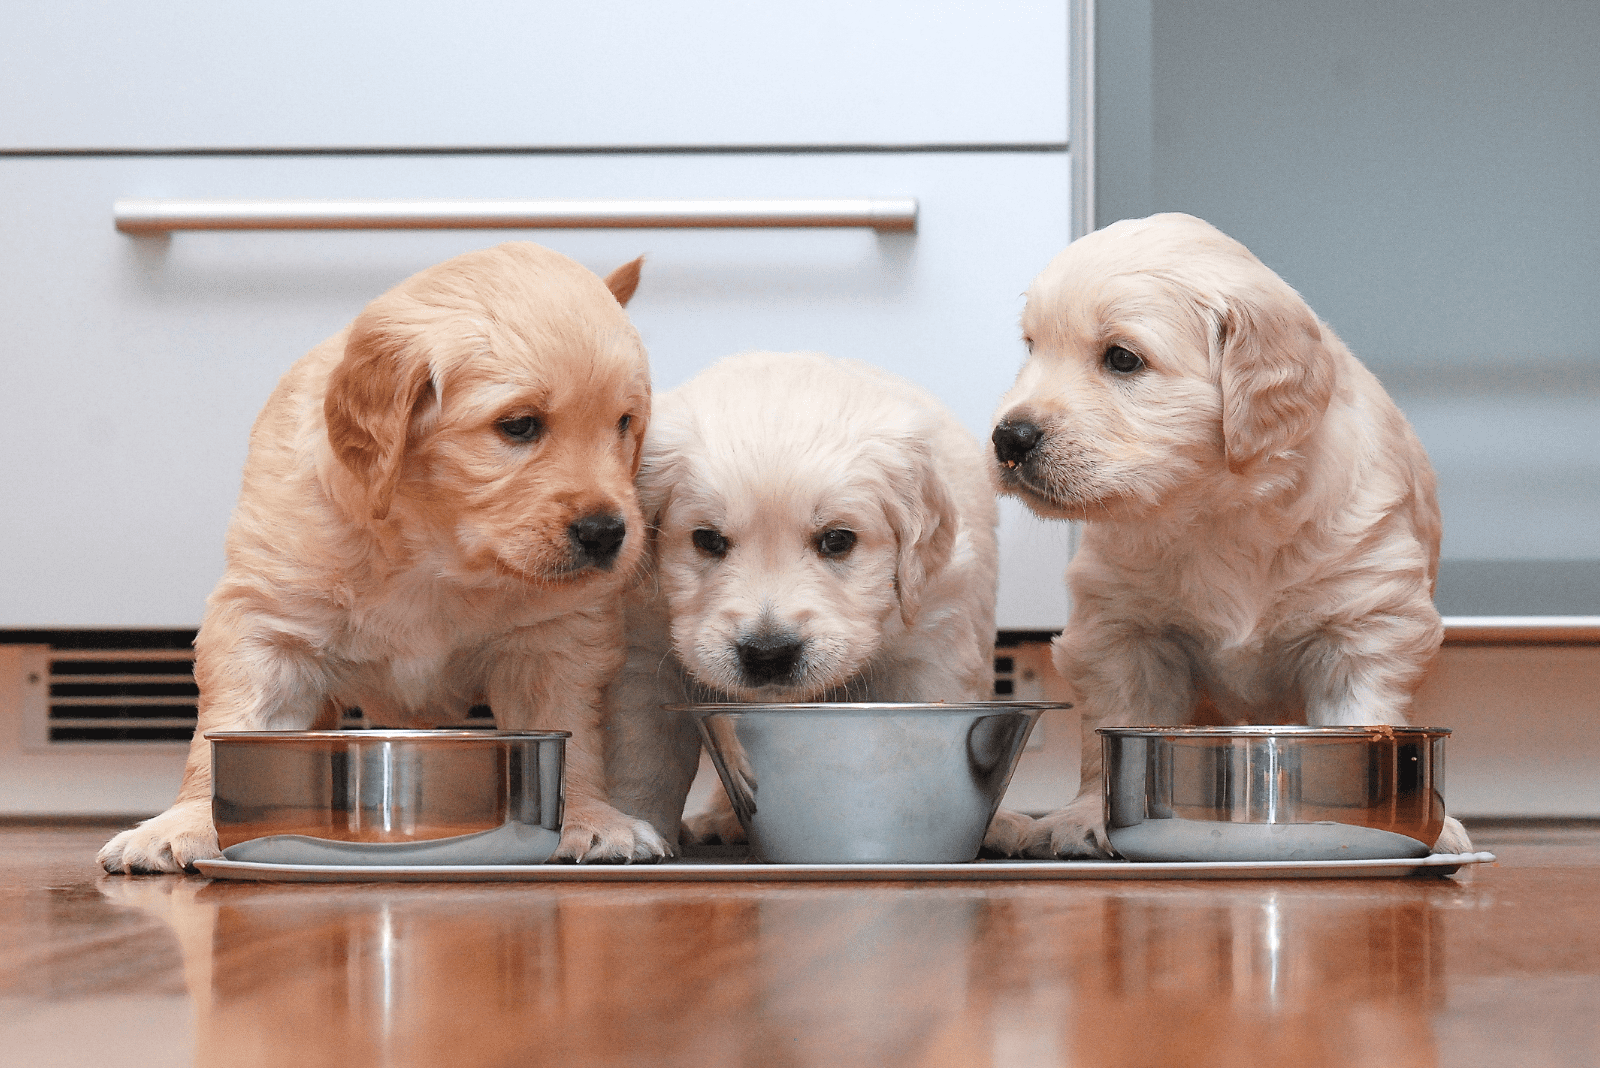 three Golden Retriever puppies are standing next to bowls of food